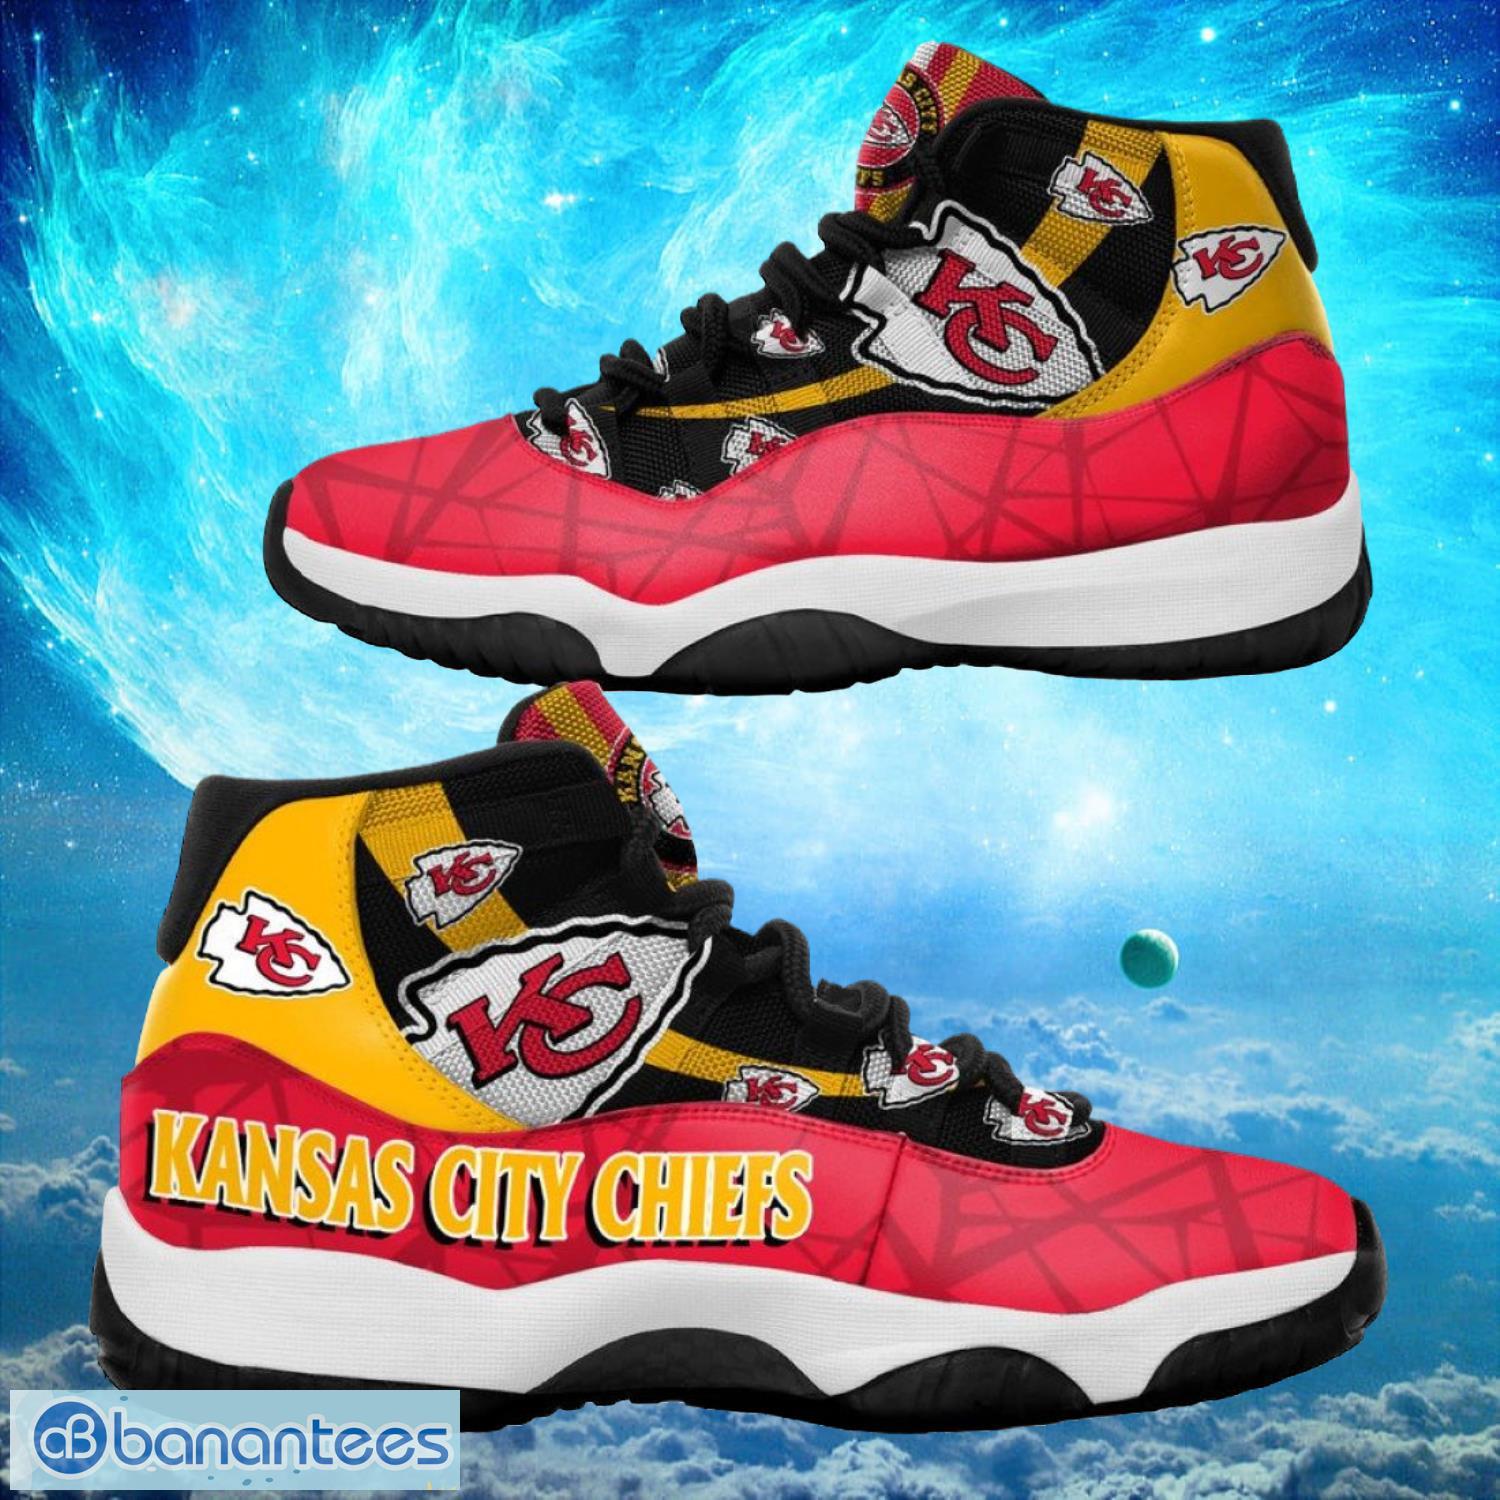 Kansas City Chiefs NFL Air Jordan 11 Sneakers Shoes Gift For Fans Product Photo 1